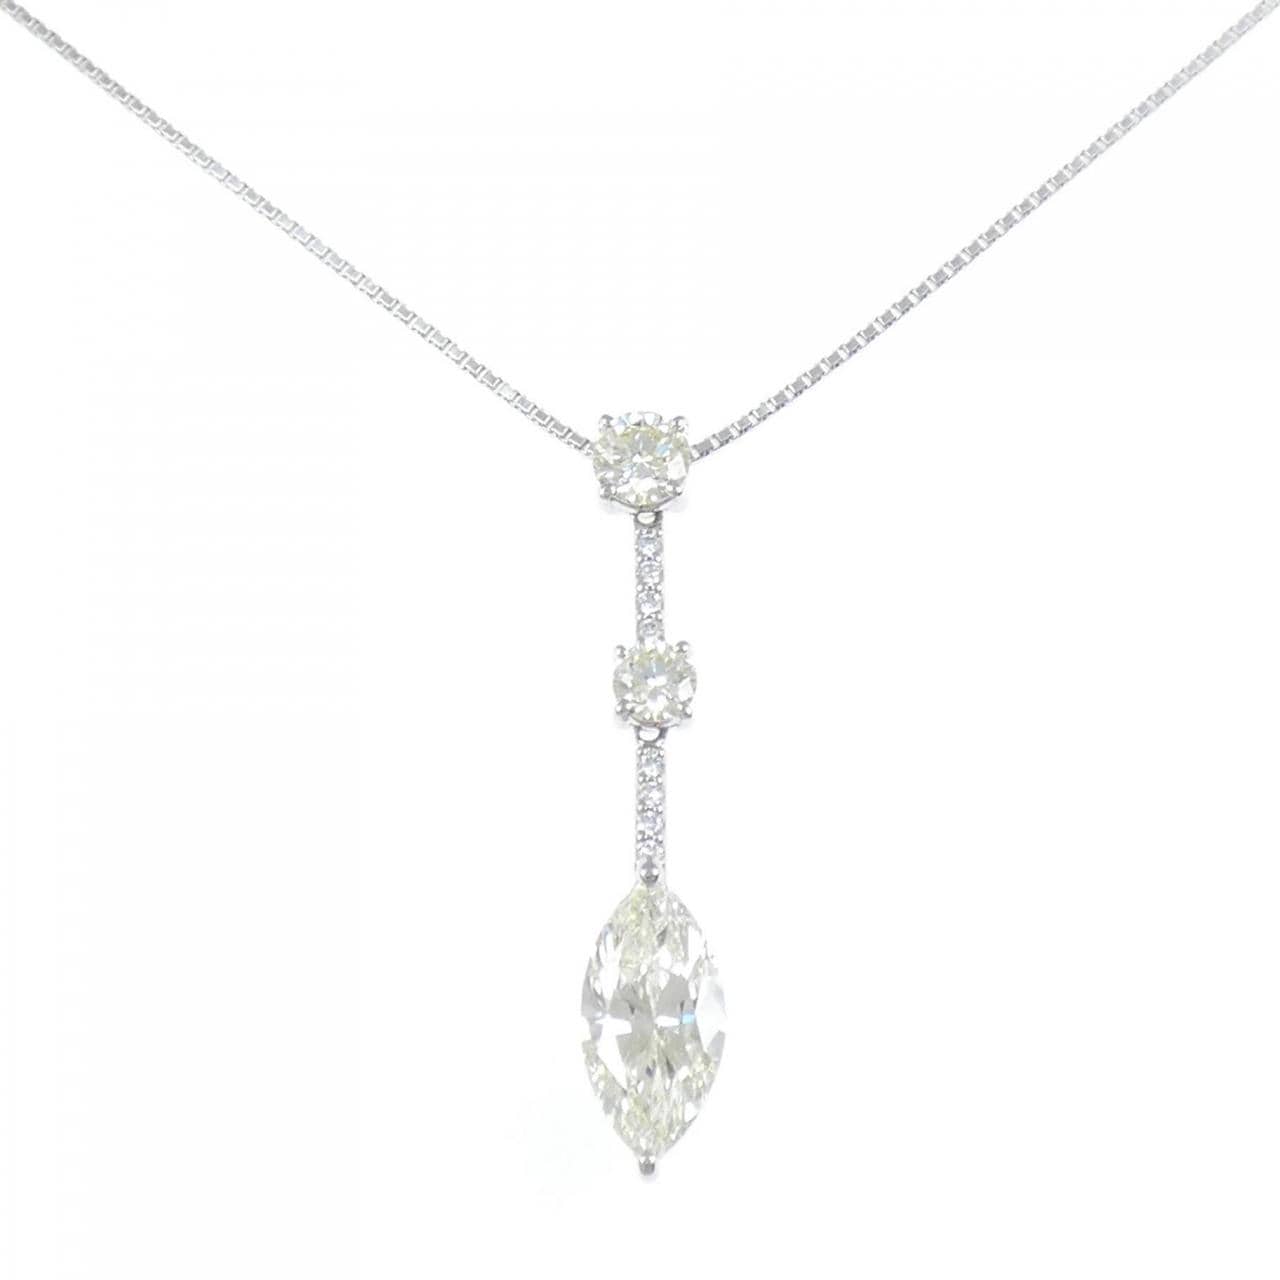 PT Diamond Necklace 3.002CT VLY SI2 Marquise Cut /0.511CT LY VS1 VG /0.305CT LY VS1 VG